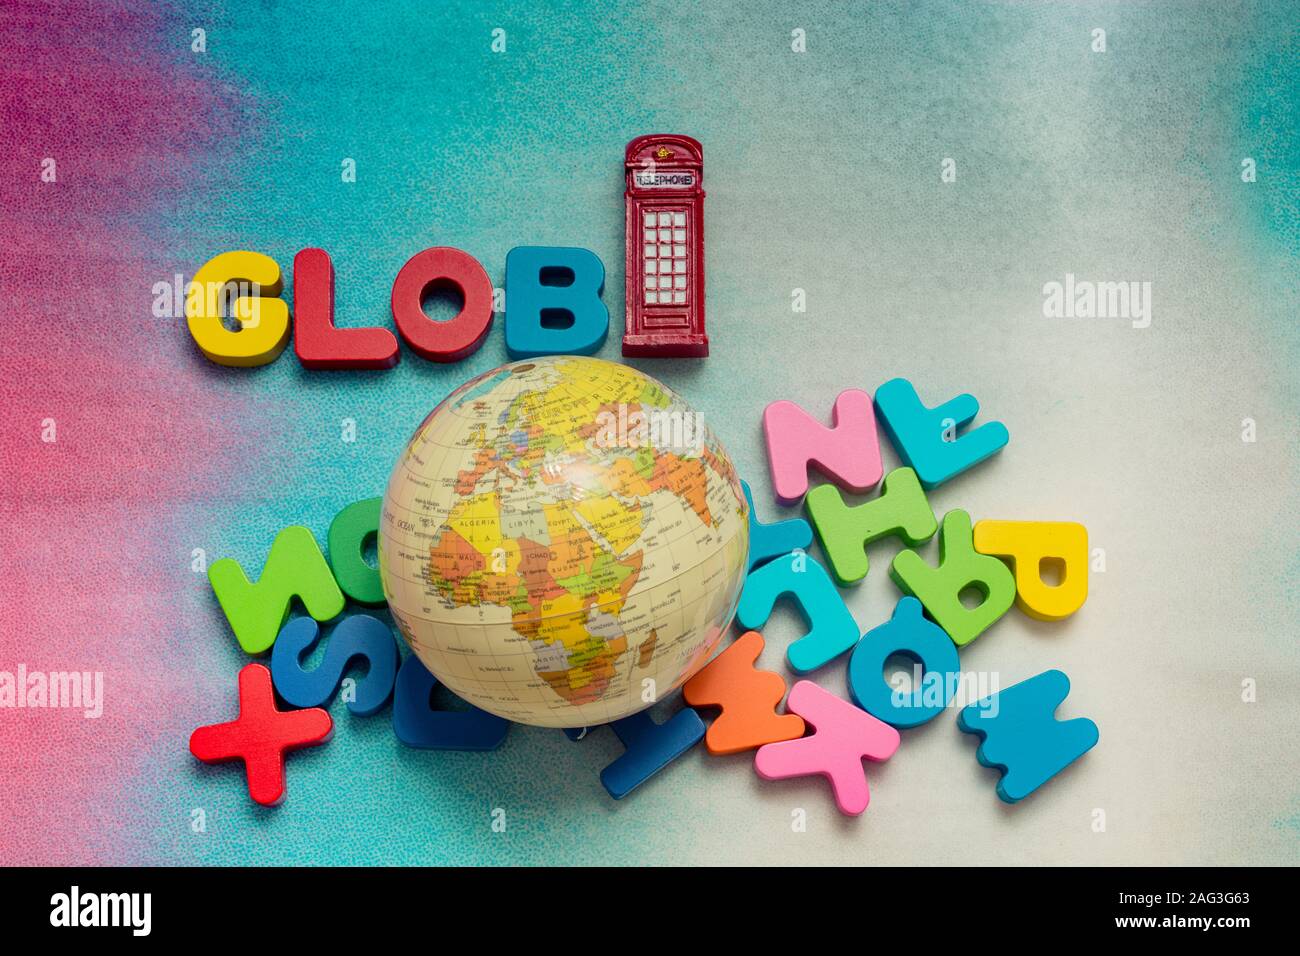 Globe, phone booth and colorful letters on a colorful background Stock Photo